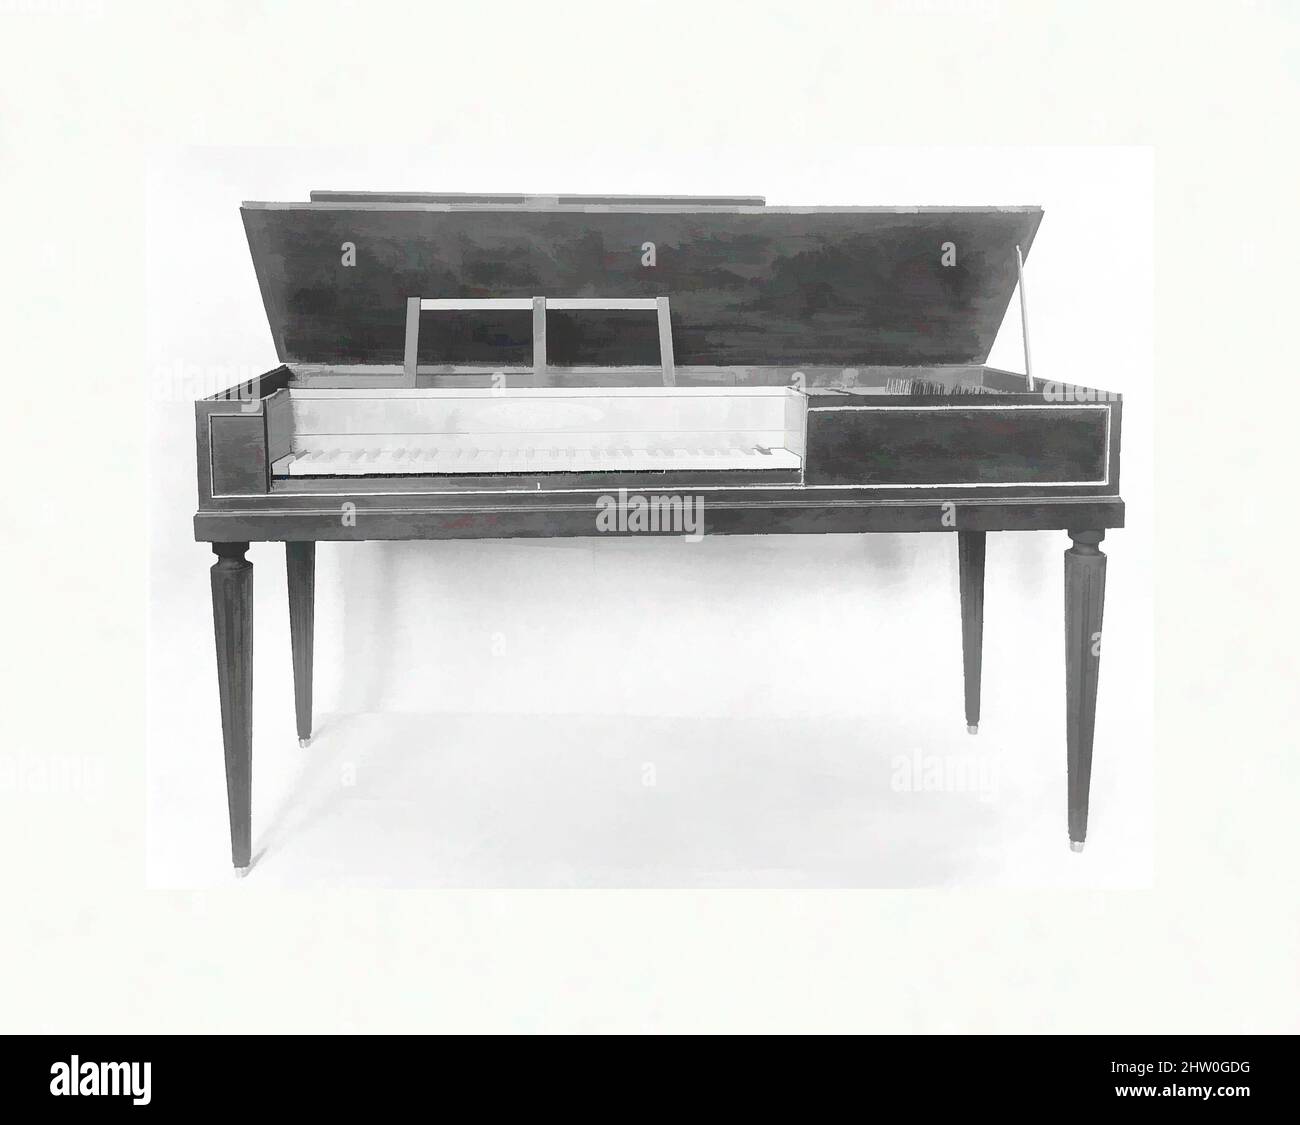 Art inspired by Square Piano, 1800, Paris, France, French, Wood, various materials, Overall: 148.4 x 55.5cm (58 7/16 x 21 7/8in.), Chordophone-Zither-struck-piano, Erard Freres et Co (Paris (1788) and London (1792) until 1826, Classic works modernized by Artotop with a splash of modernity. Shapes, color and value, eye-catching visual impact on art. Emotions through freedom of artworks in a contemporary way. A timeless message pursuing a wildly creative new direction. Artists turning to the digital medium and creating the Artotop NFT Stock Photo